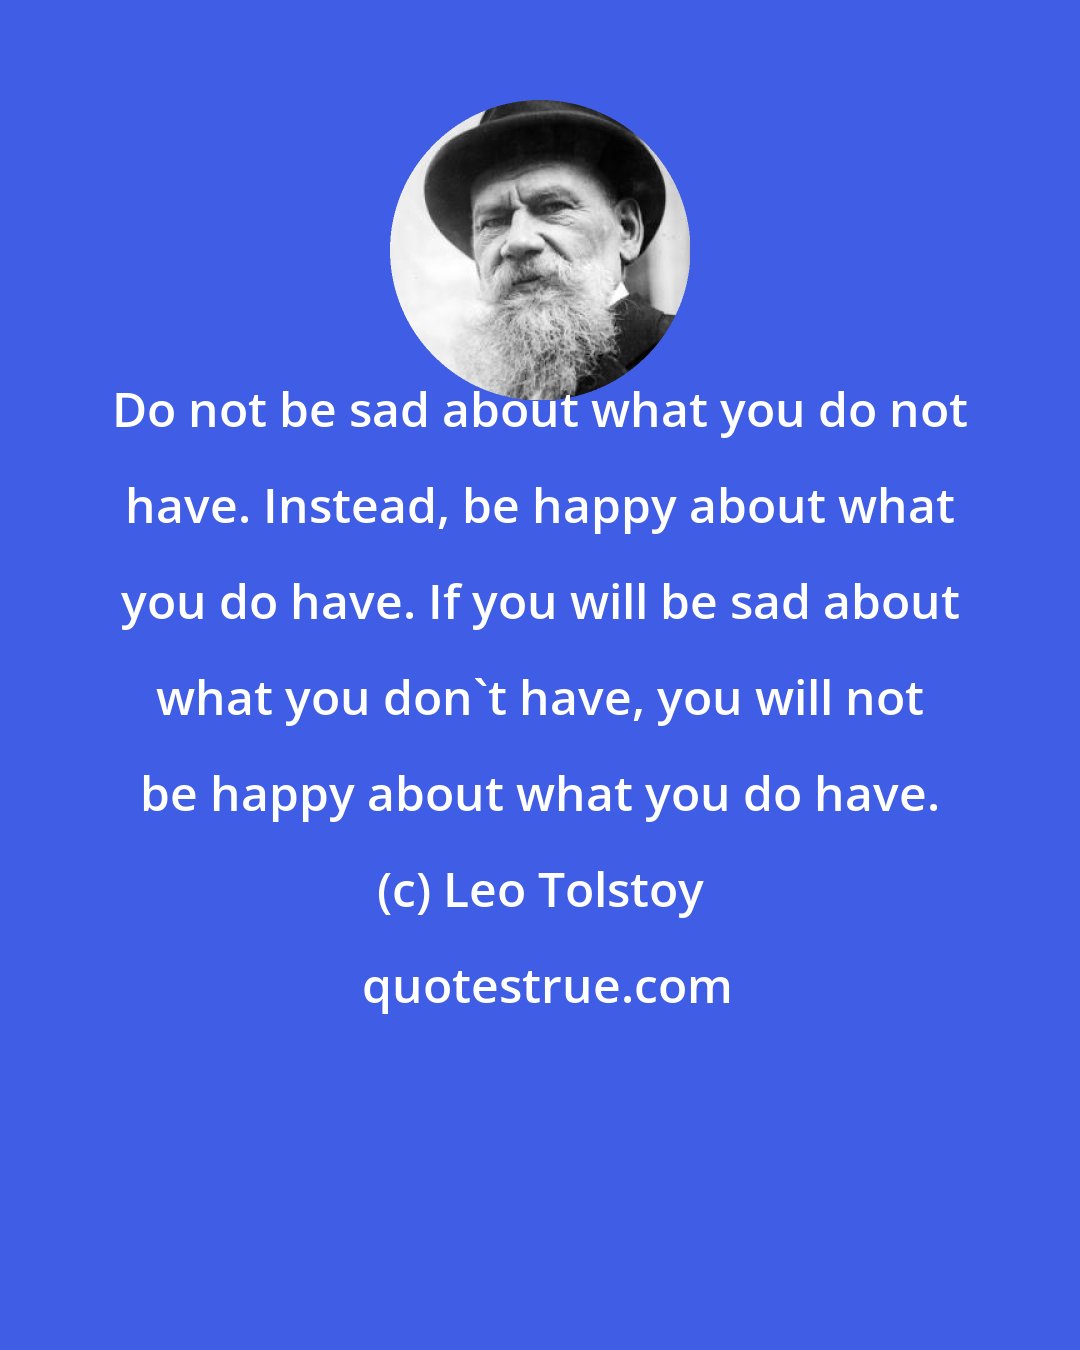 Leo Tolstoy: Do not be sad about what you do not have. Instead, be happy about what you do have. If you will be sad about what you don't have, you will not be happy about what you do have.